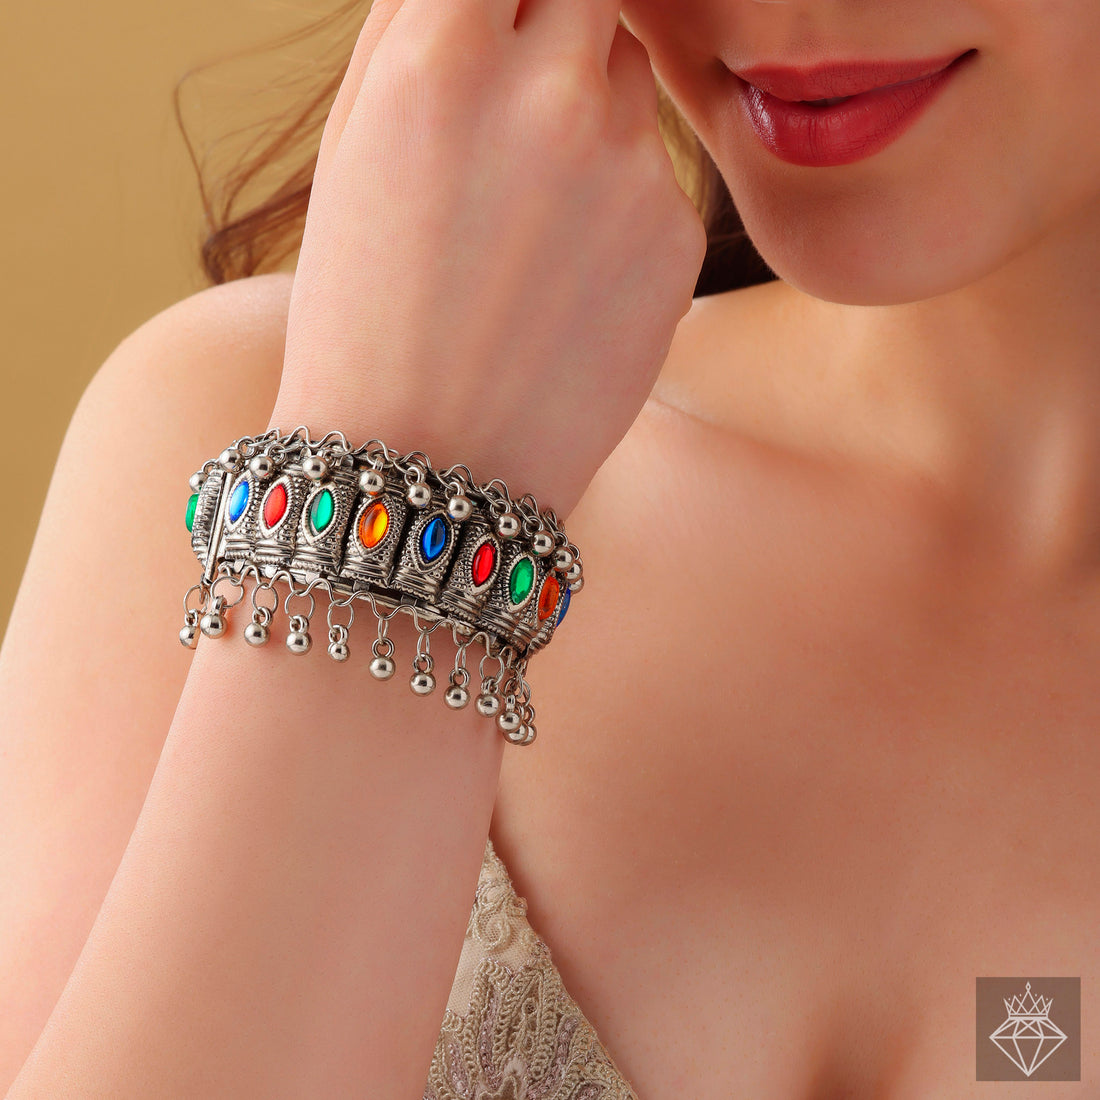 PRAO Multi-Colored Crystal Bangle Bracelet with Ghungroo Charms